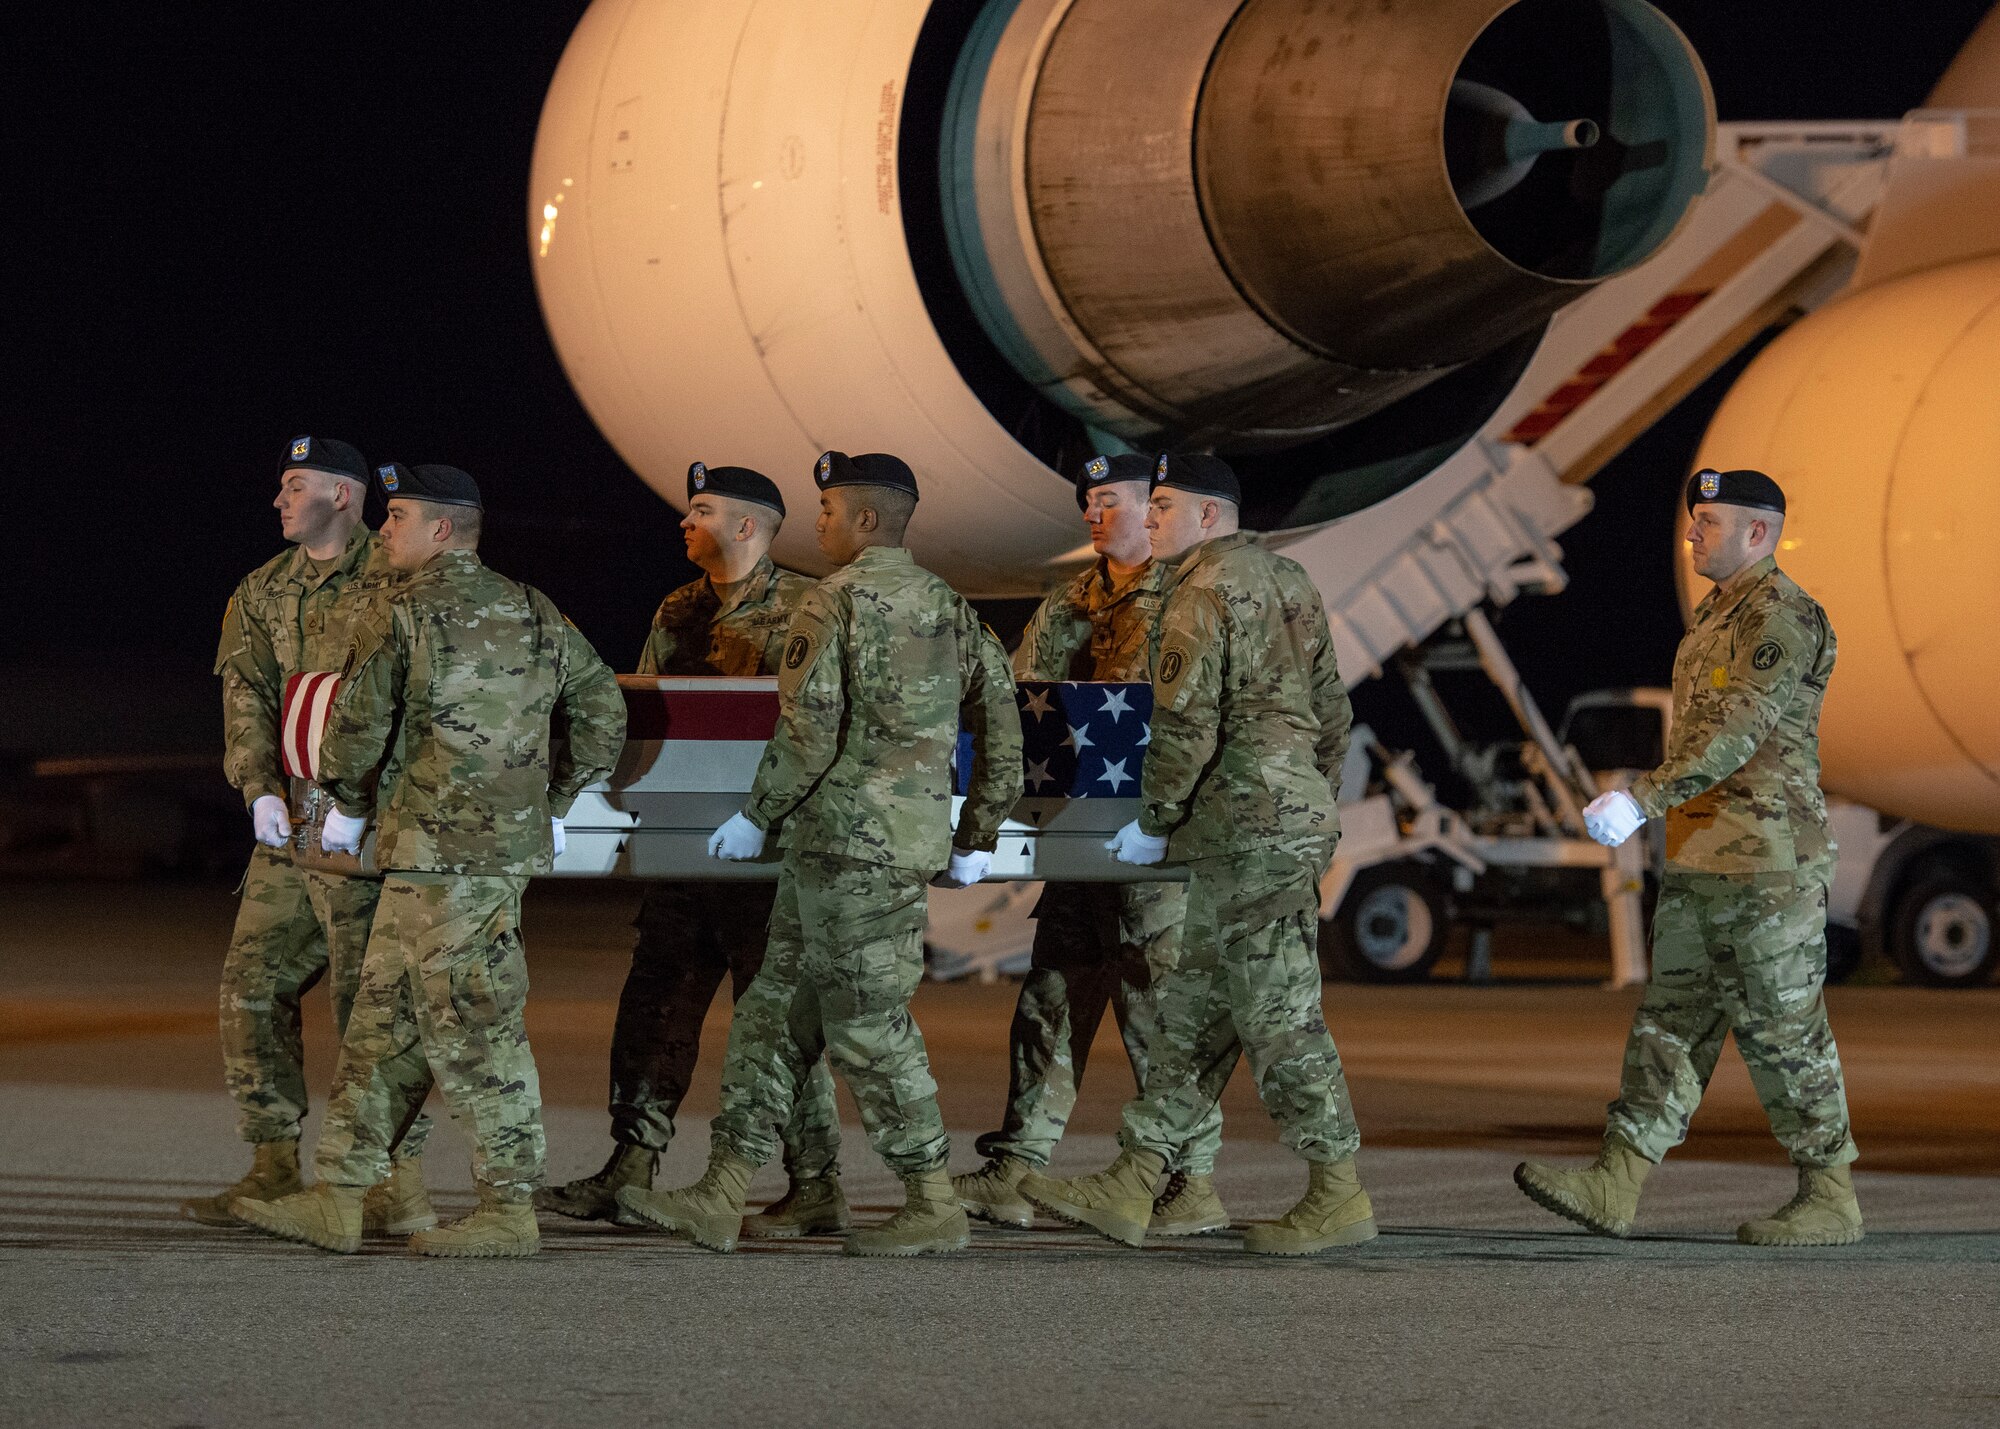 A U.S. Army carry team transfers the remains of Army Spc. Jackson D. Johnson of Hillsboro, Mo., March 7, 2019, at Dover Air Force Base, Del. Johnson was assigned to 657th Transportation Company, 419th Transportation Battalion, 103rd Sustainment Command, Mount Vernon, Ill. (U.S. Air Force photo by Staff Sgt. Jared Duhon)